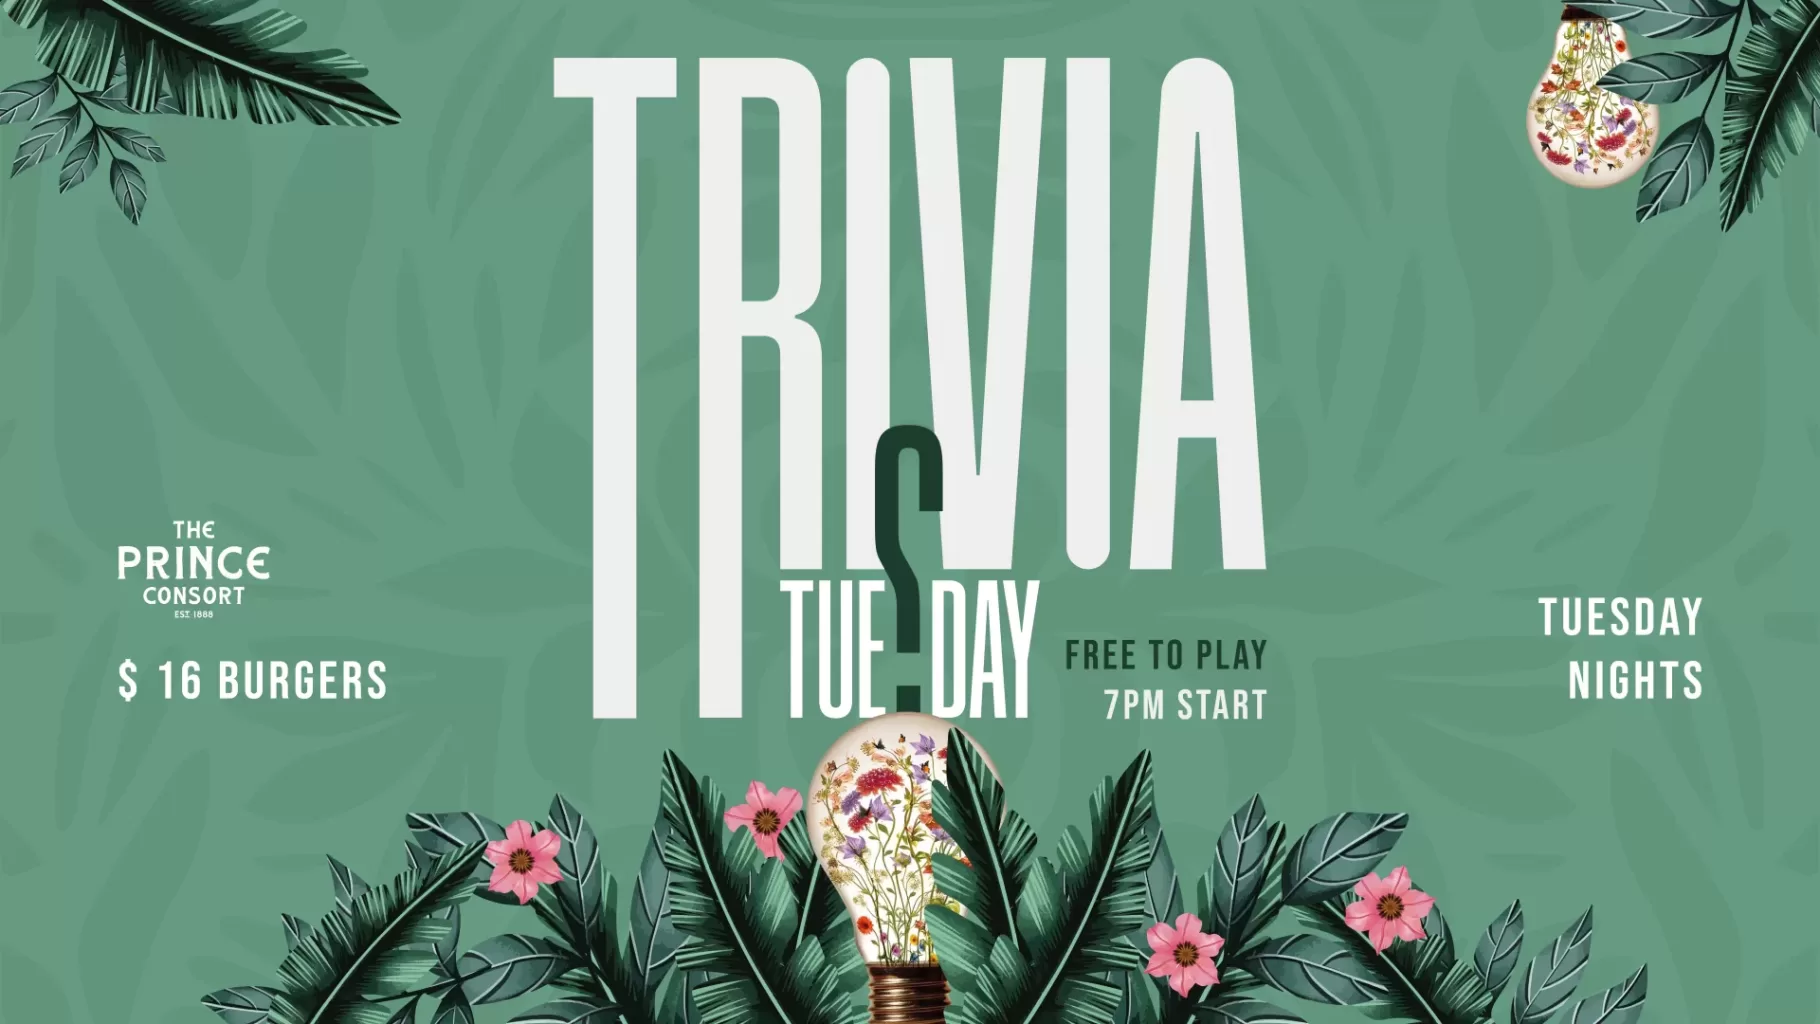 Trivia Tuesdays | Events at The Prince Consort